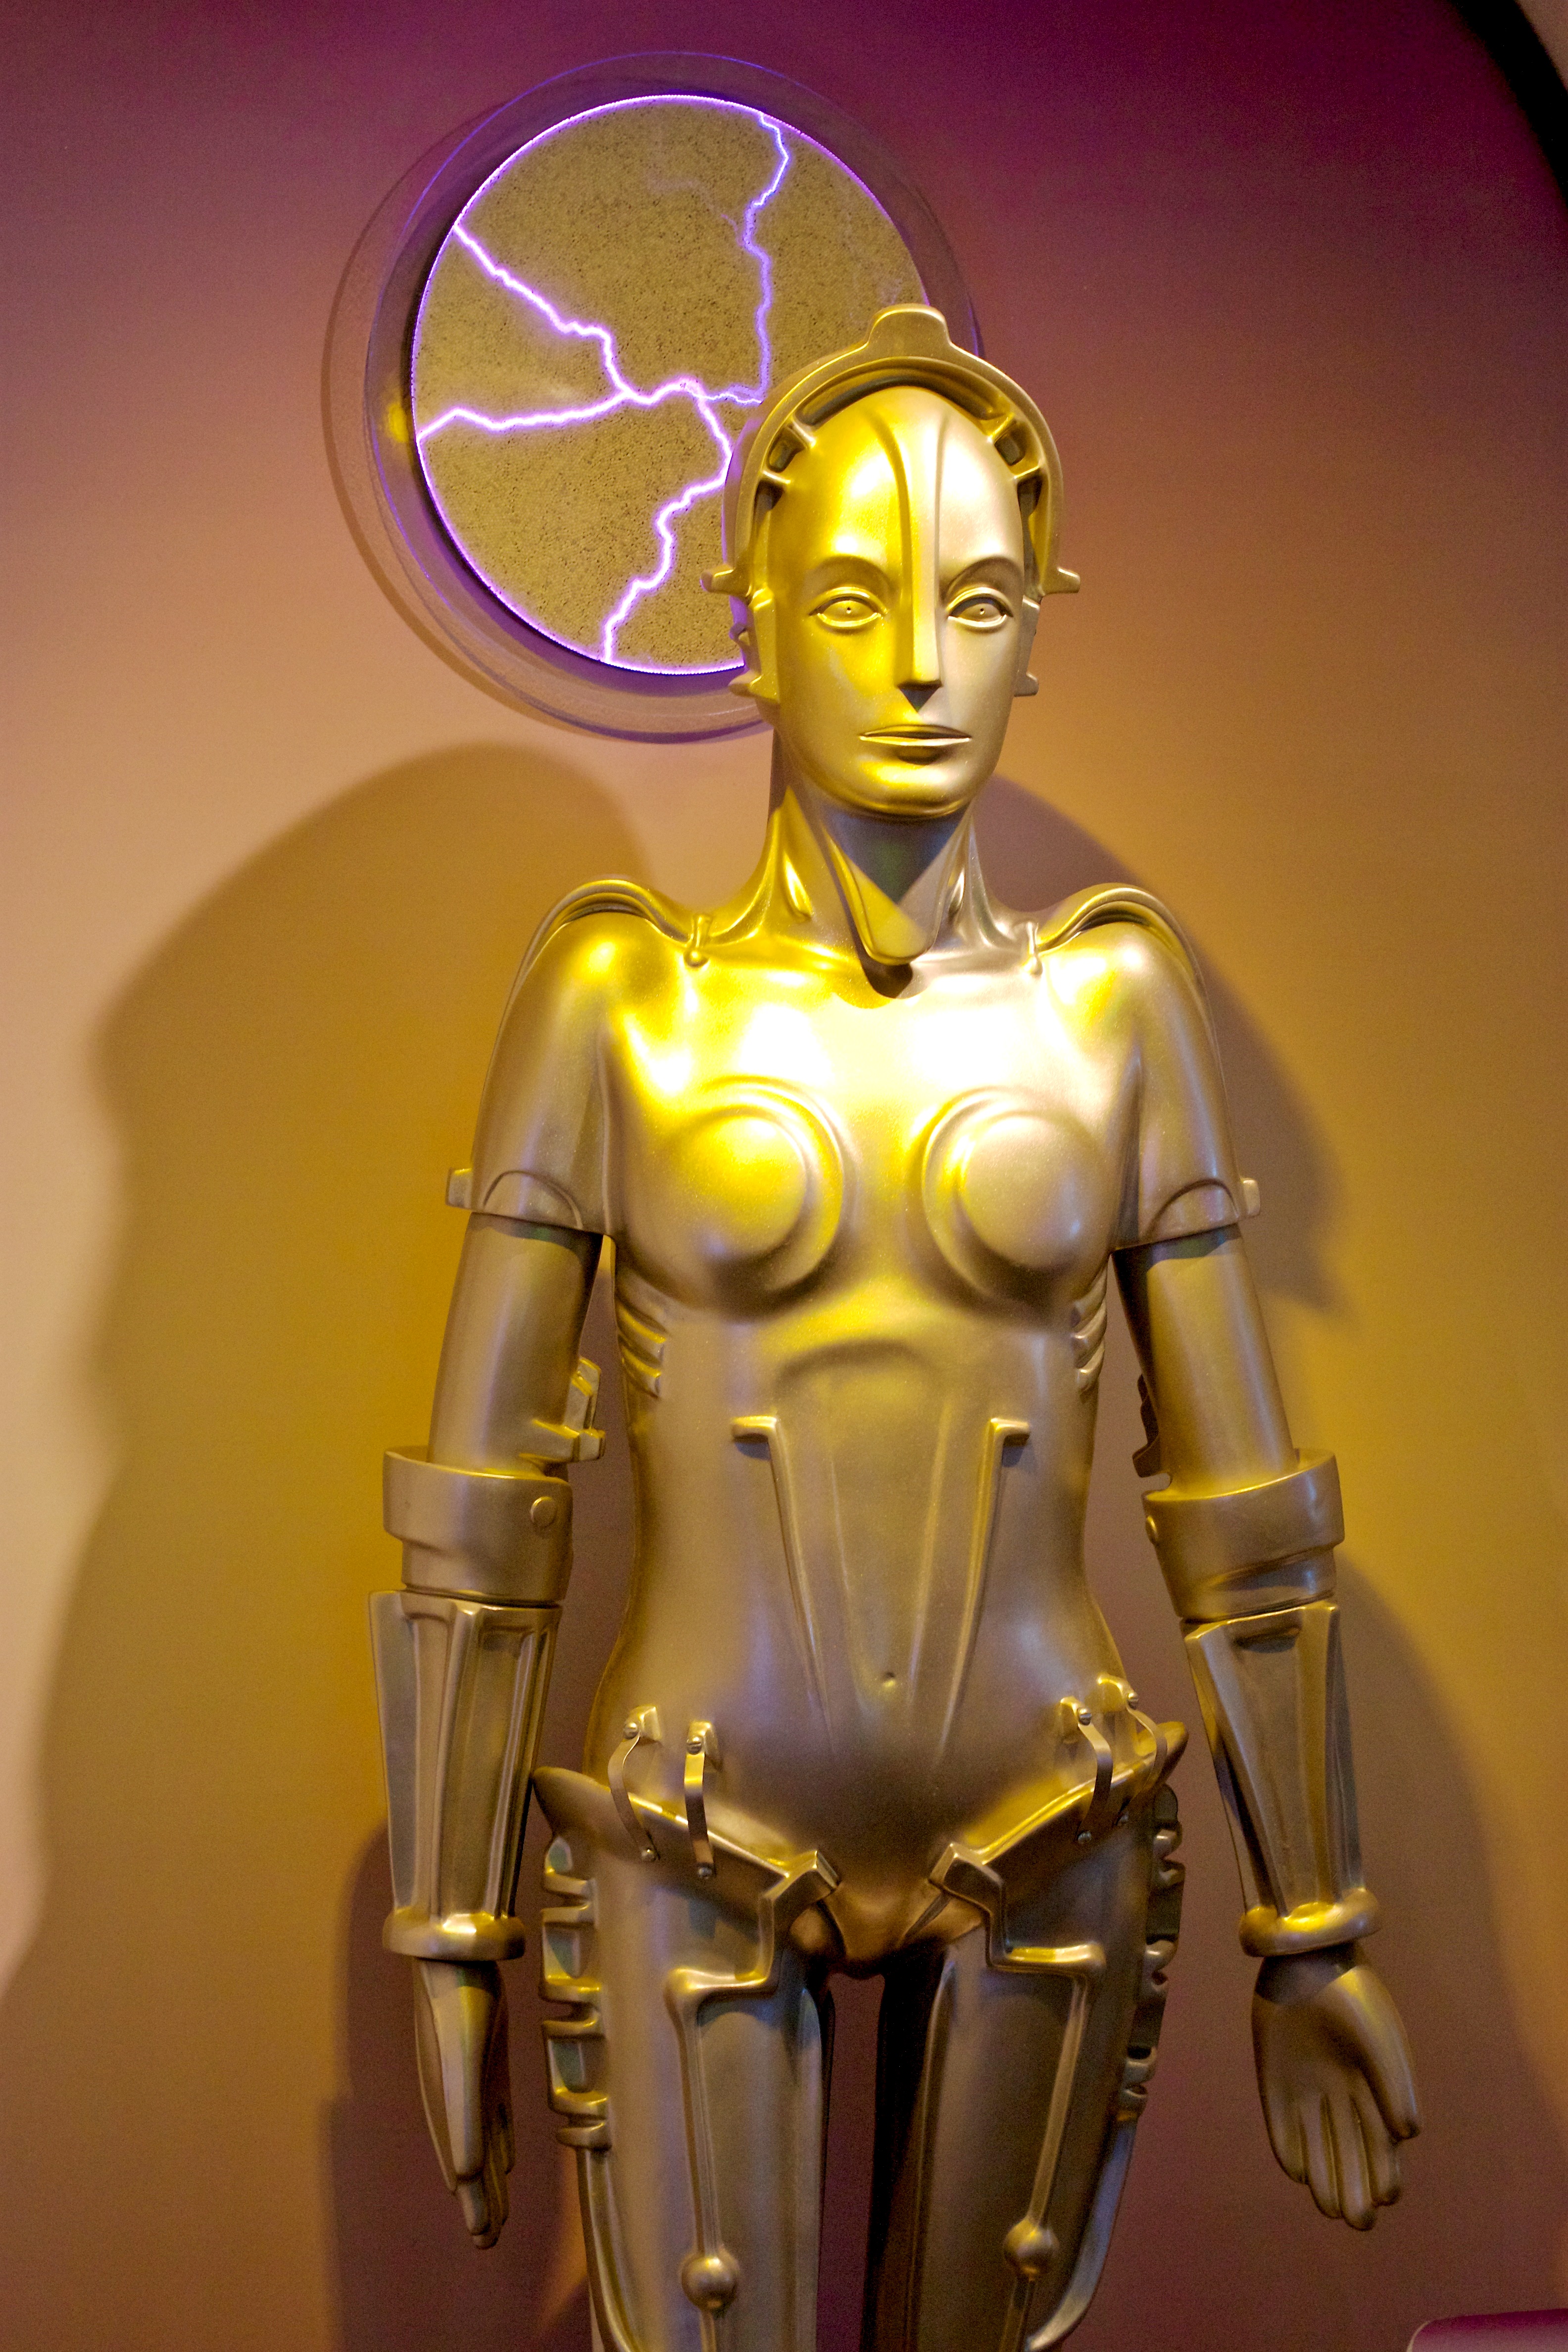 from the film Metropolis, on at the Robot Hall of Fame.jpg - Commons